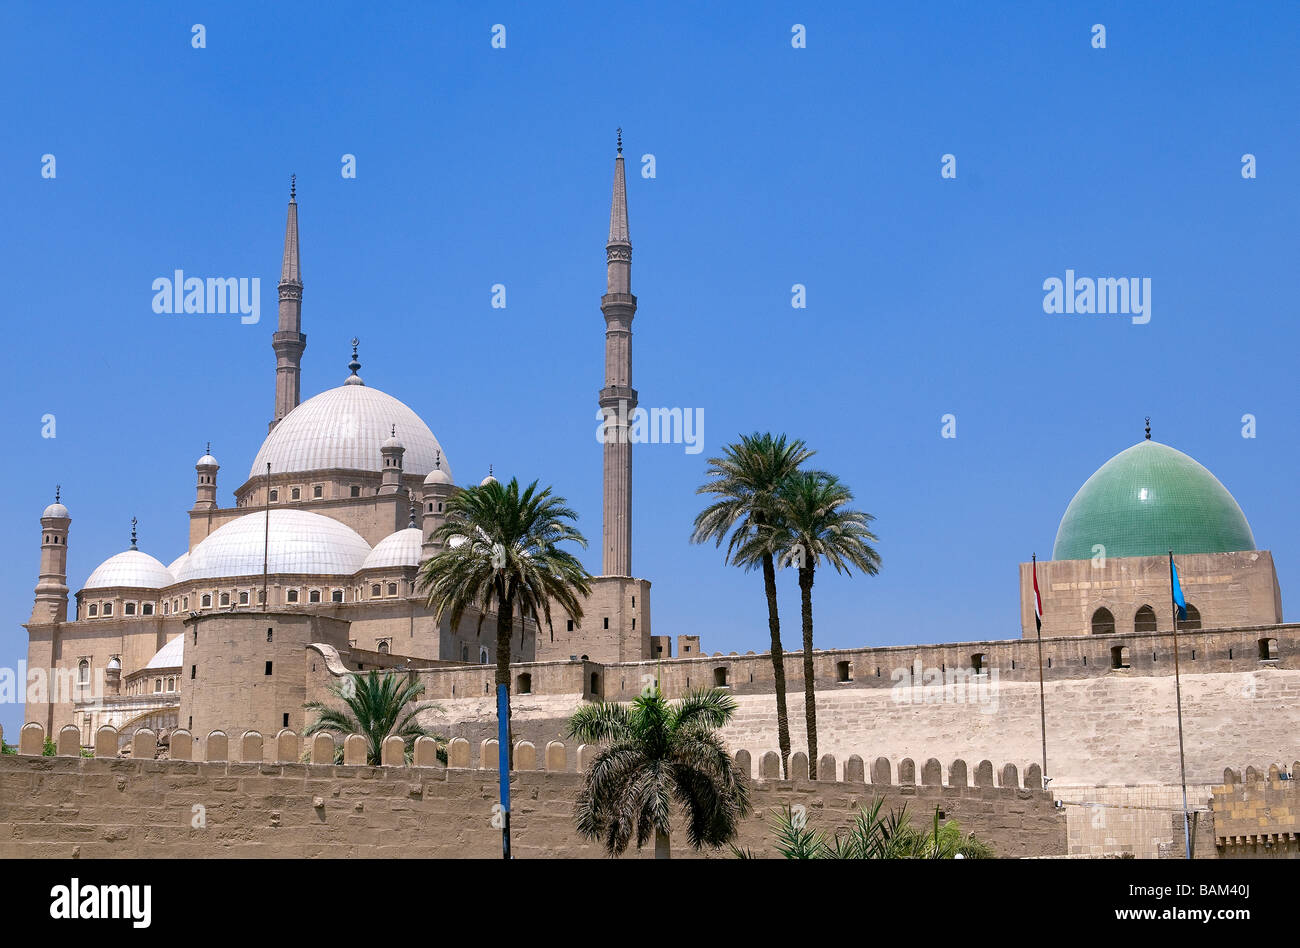 Egypt, Cairo, old town listed as World Heritage by UNESCO, the Citadel with Mohammed Ali Mosque on the left Stock Photo